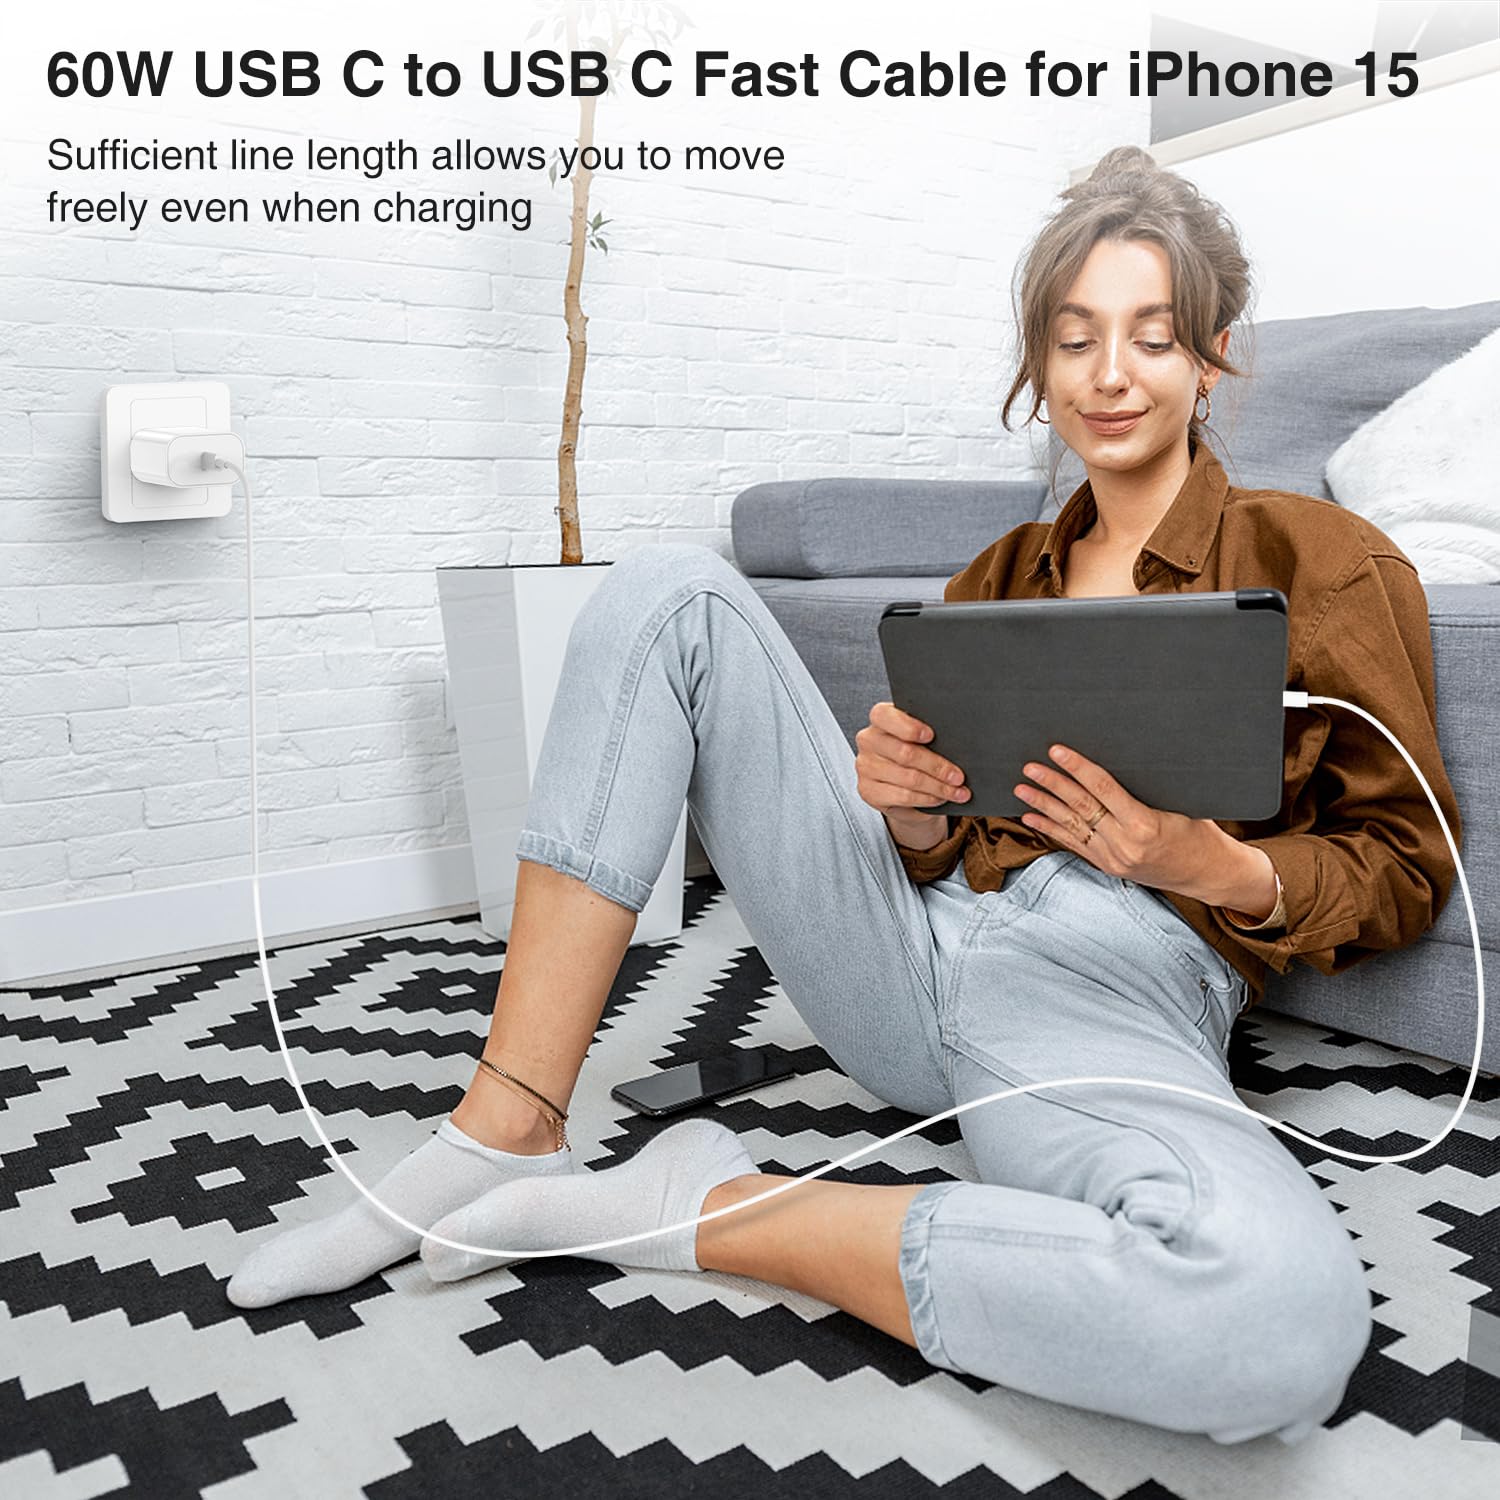 iPhone 15 Charger Block/10ft Type C to C Cable Cord Long,20W USB C Fast Charging Plug for Apple iPhone 15 Plus/15 Pro Max,iPad Pro 12.9/11inch 4/3th/Air/Mini 6 Generation,Wall Power Adapter Cube Brick